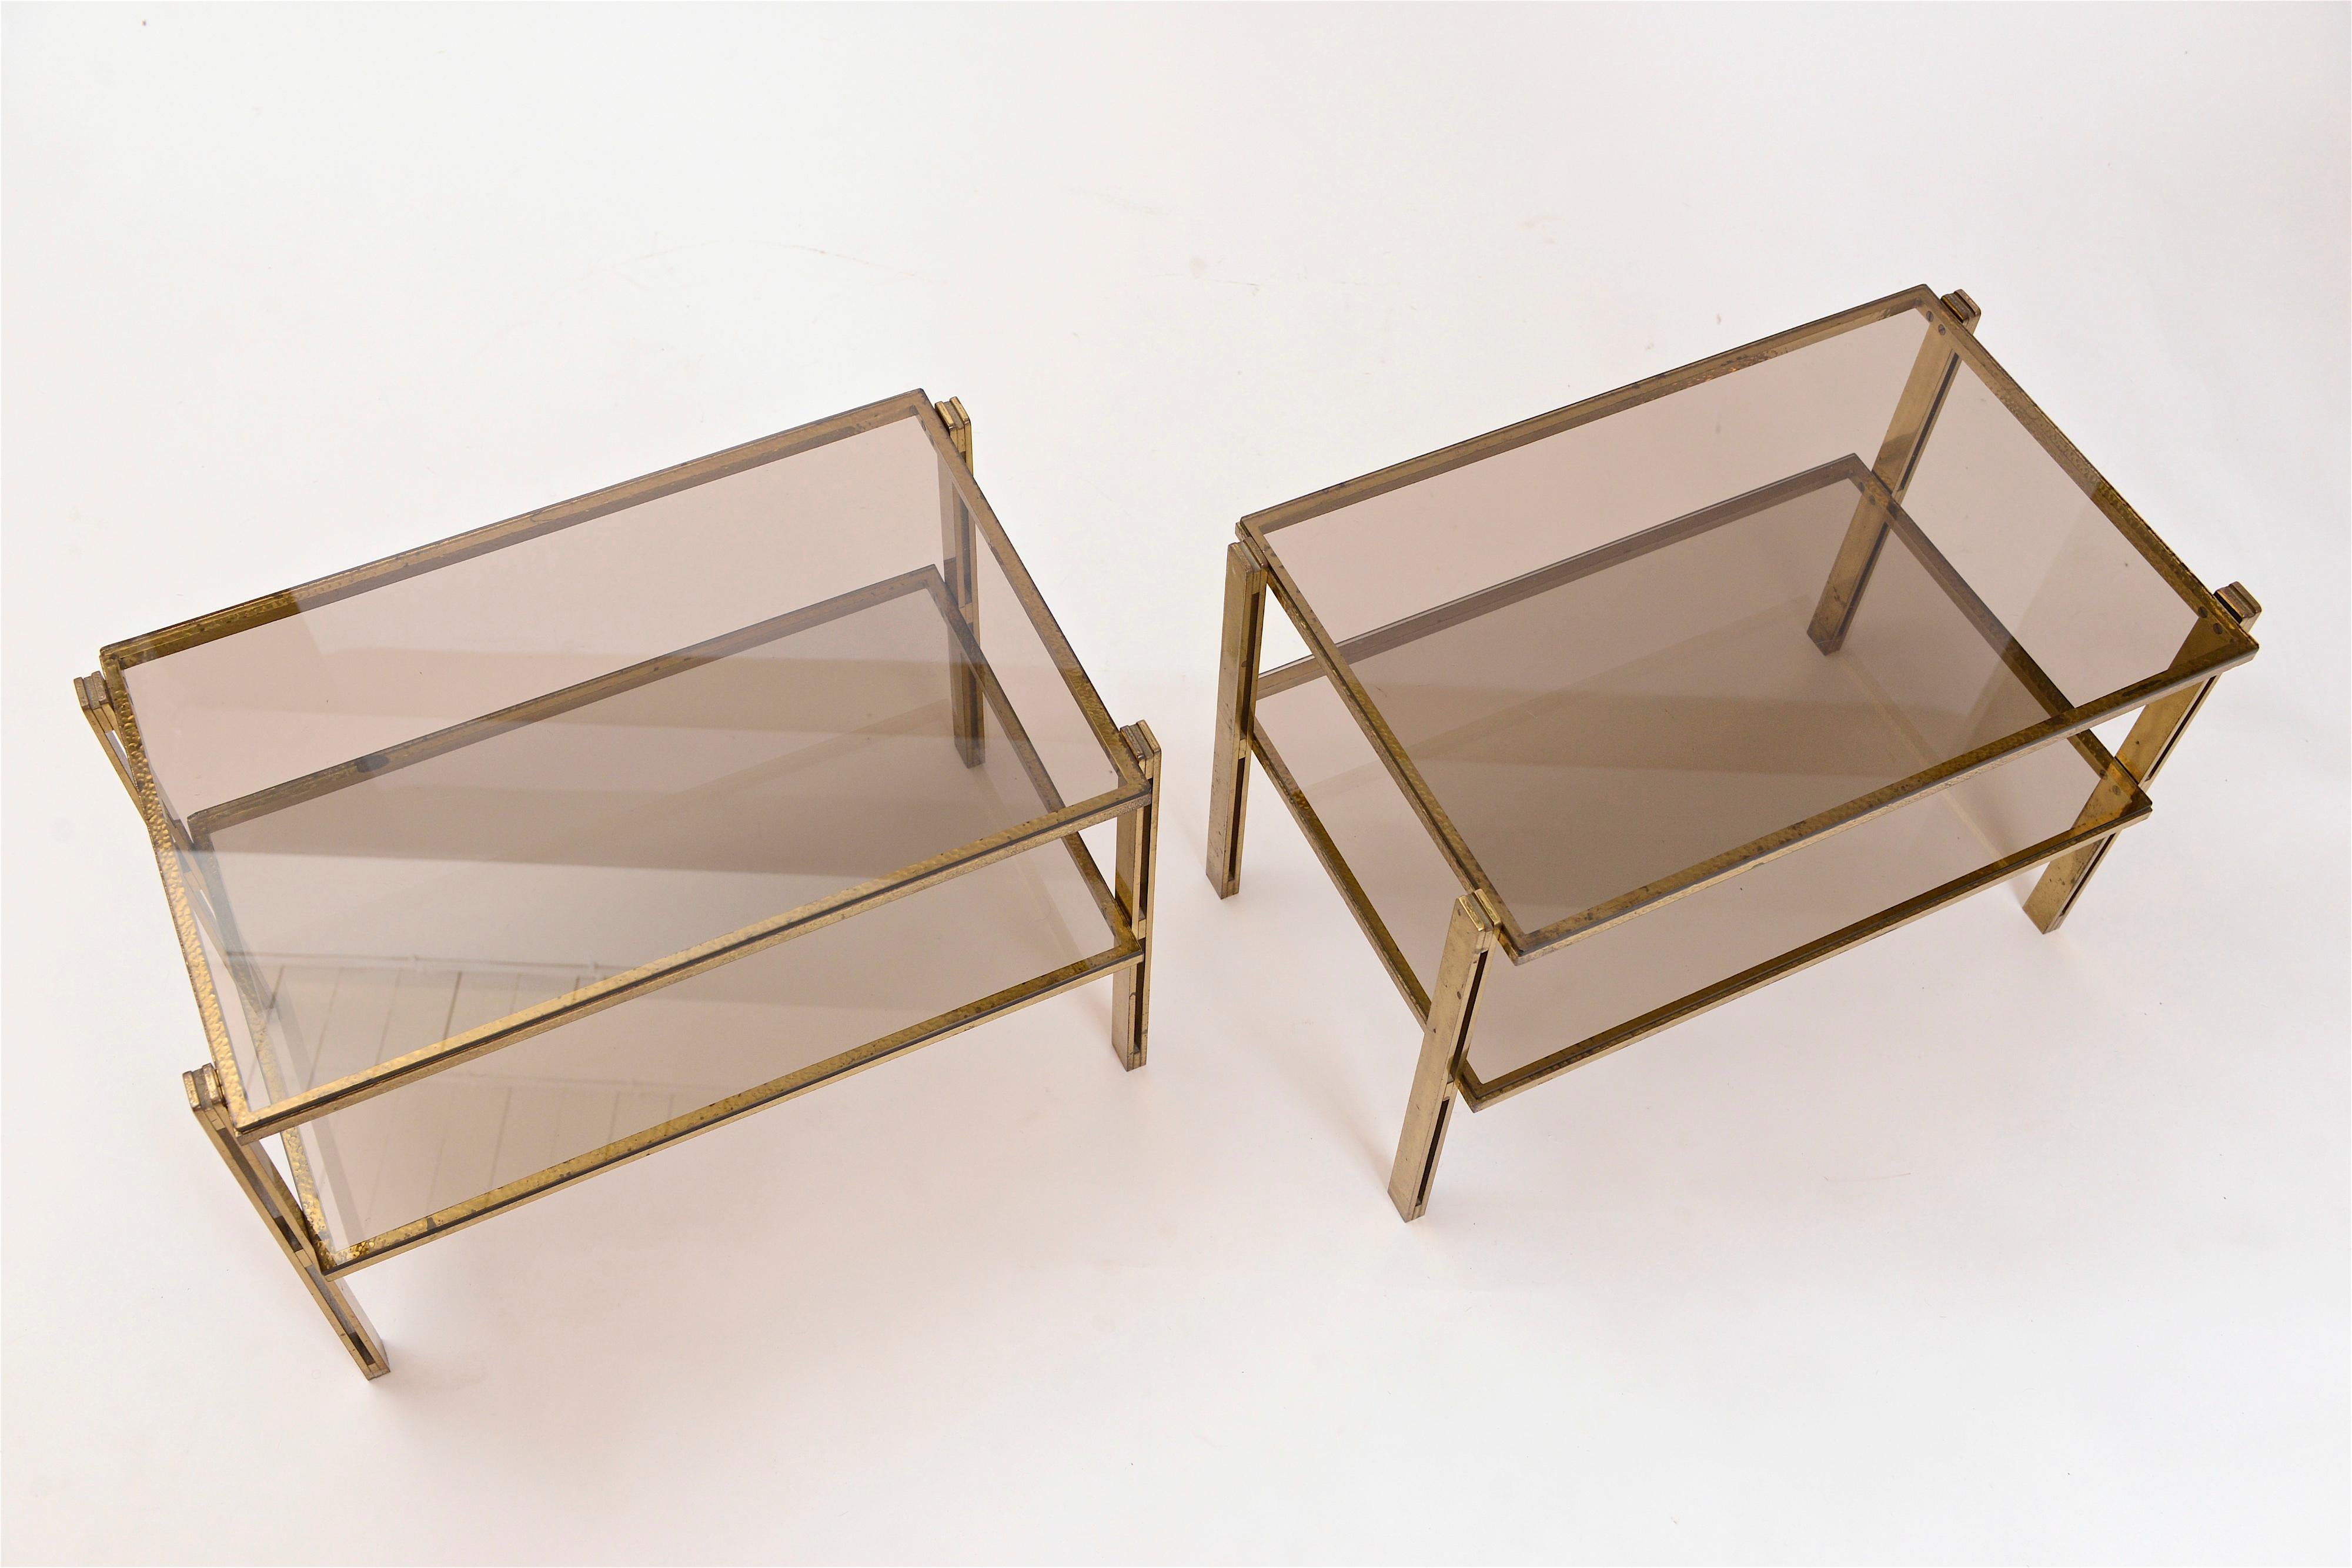 Pair of Hammered Brass Side Tables Attributed to Osvaldo Borsani, circa 1958 For Sale 2